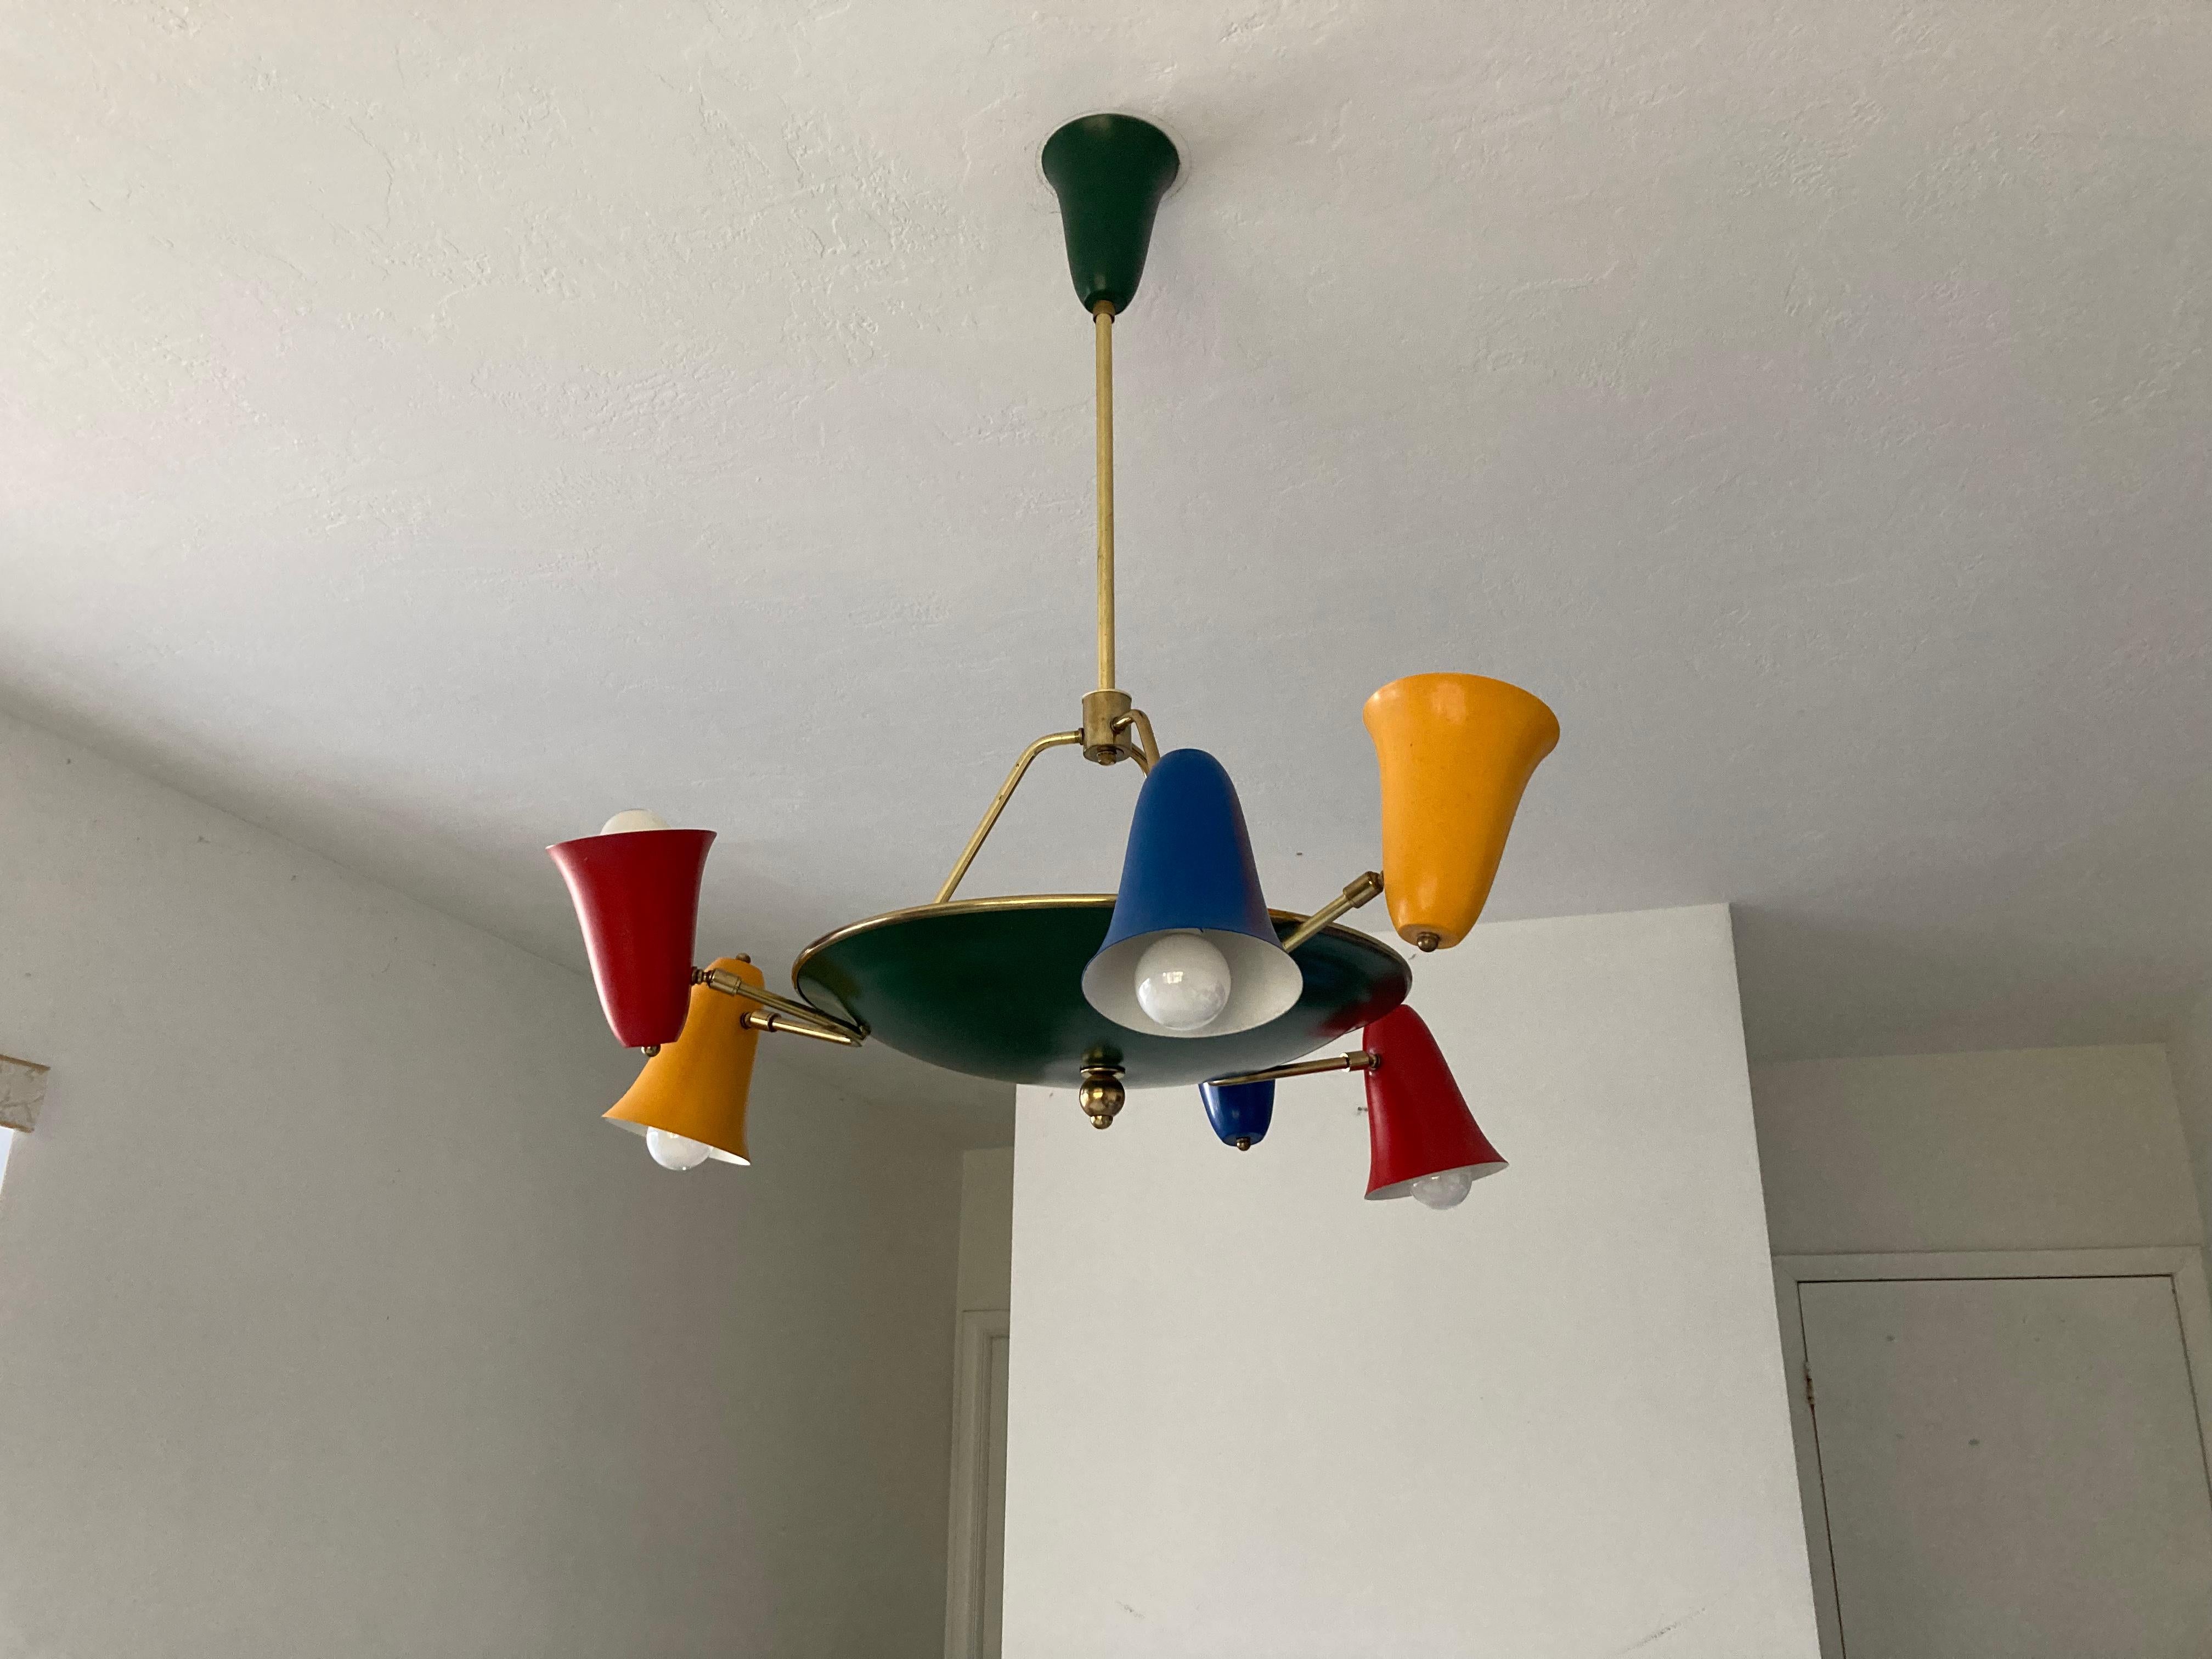 Rare 1950s Italian chandelier, six shades that turn 360 degrees. Brass, red, green, yellow and blue finish. The chandelier is 30” in diameter and 32” in height. According to previous owner chandelier was refinished and rewired throughout the years.